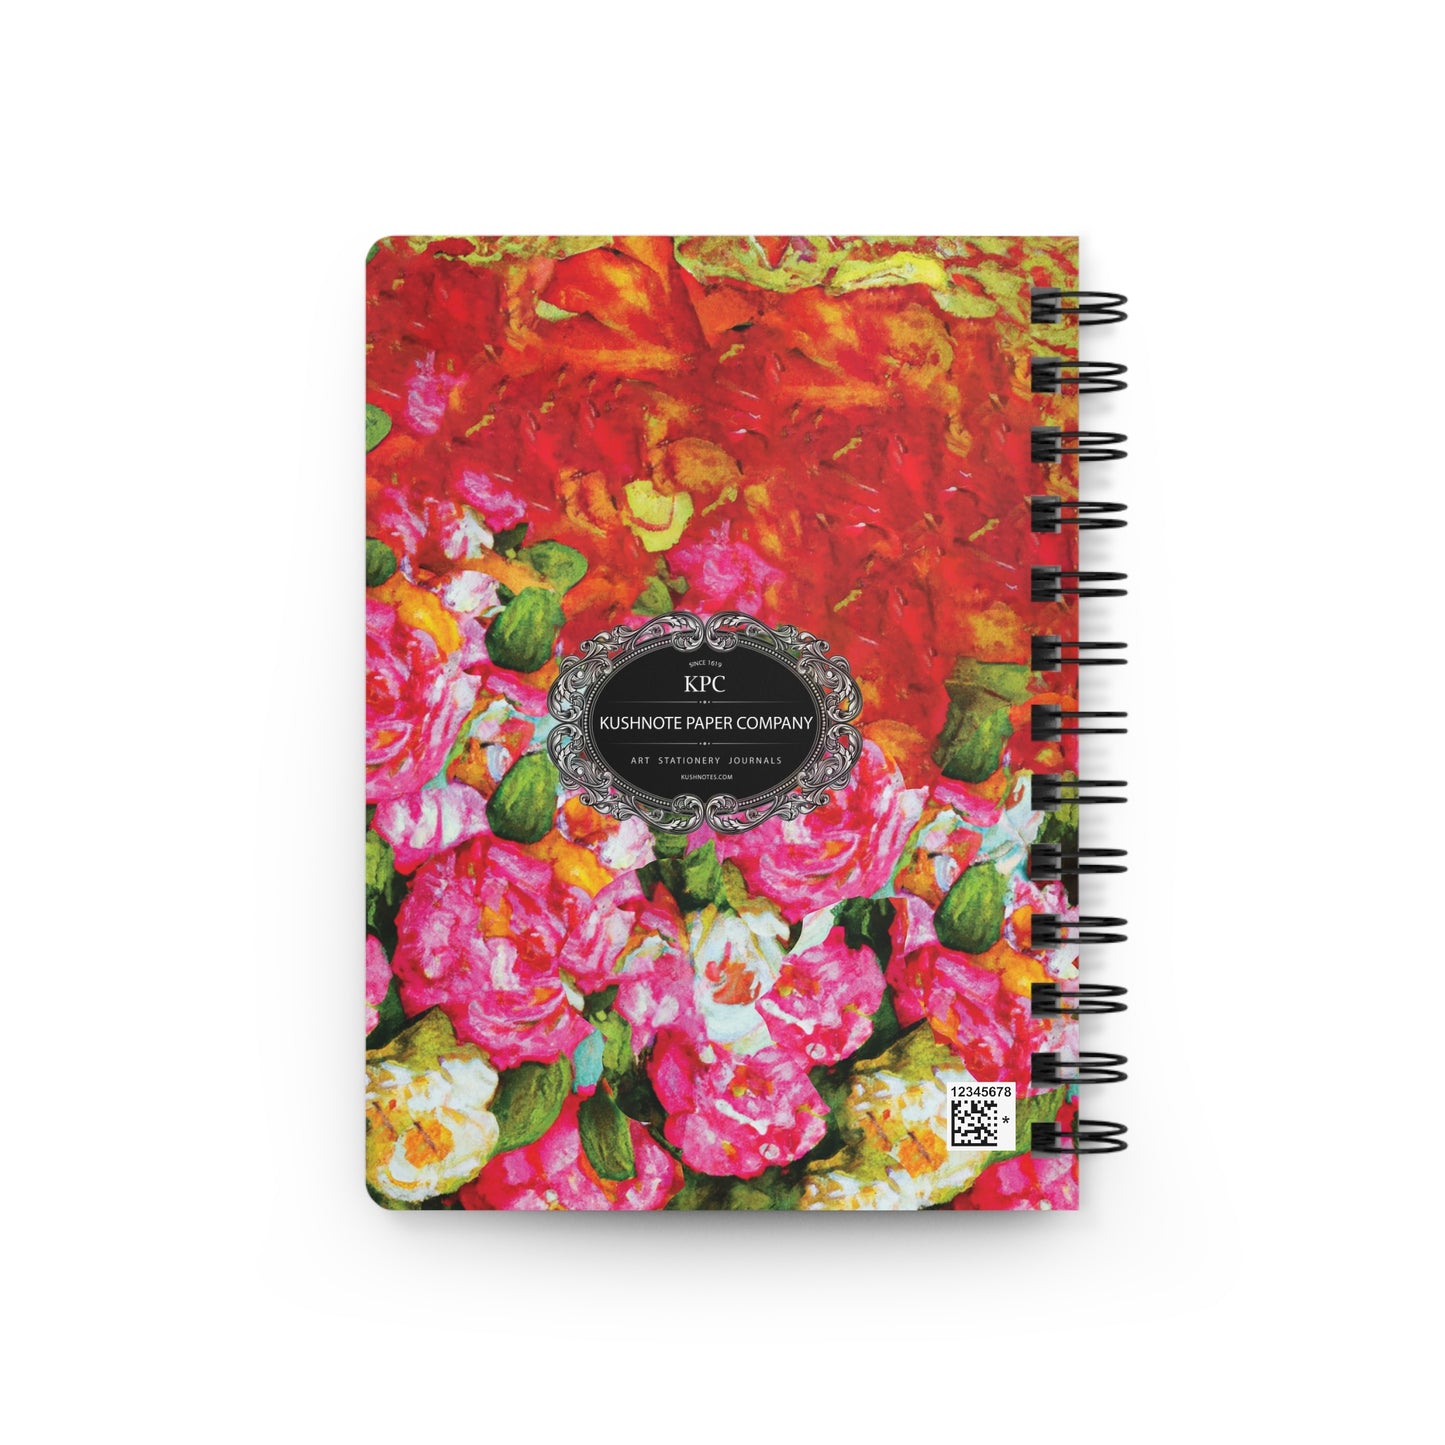 Lovey Spiral Bound Notebooks and Journals with 2023-2024 Year-at-a-Glance Calendar